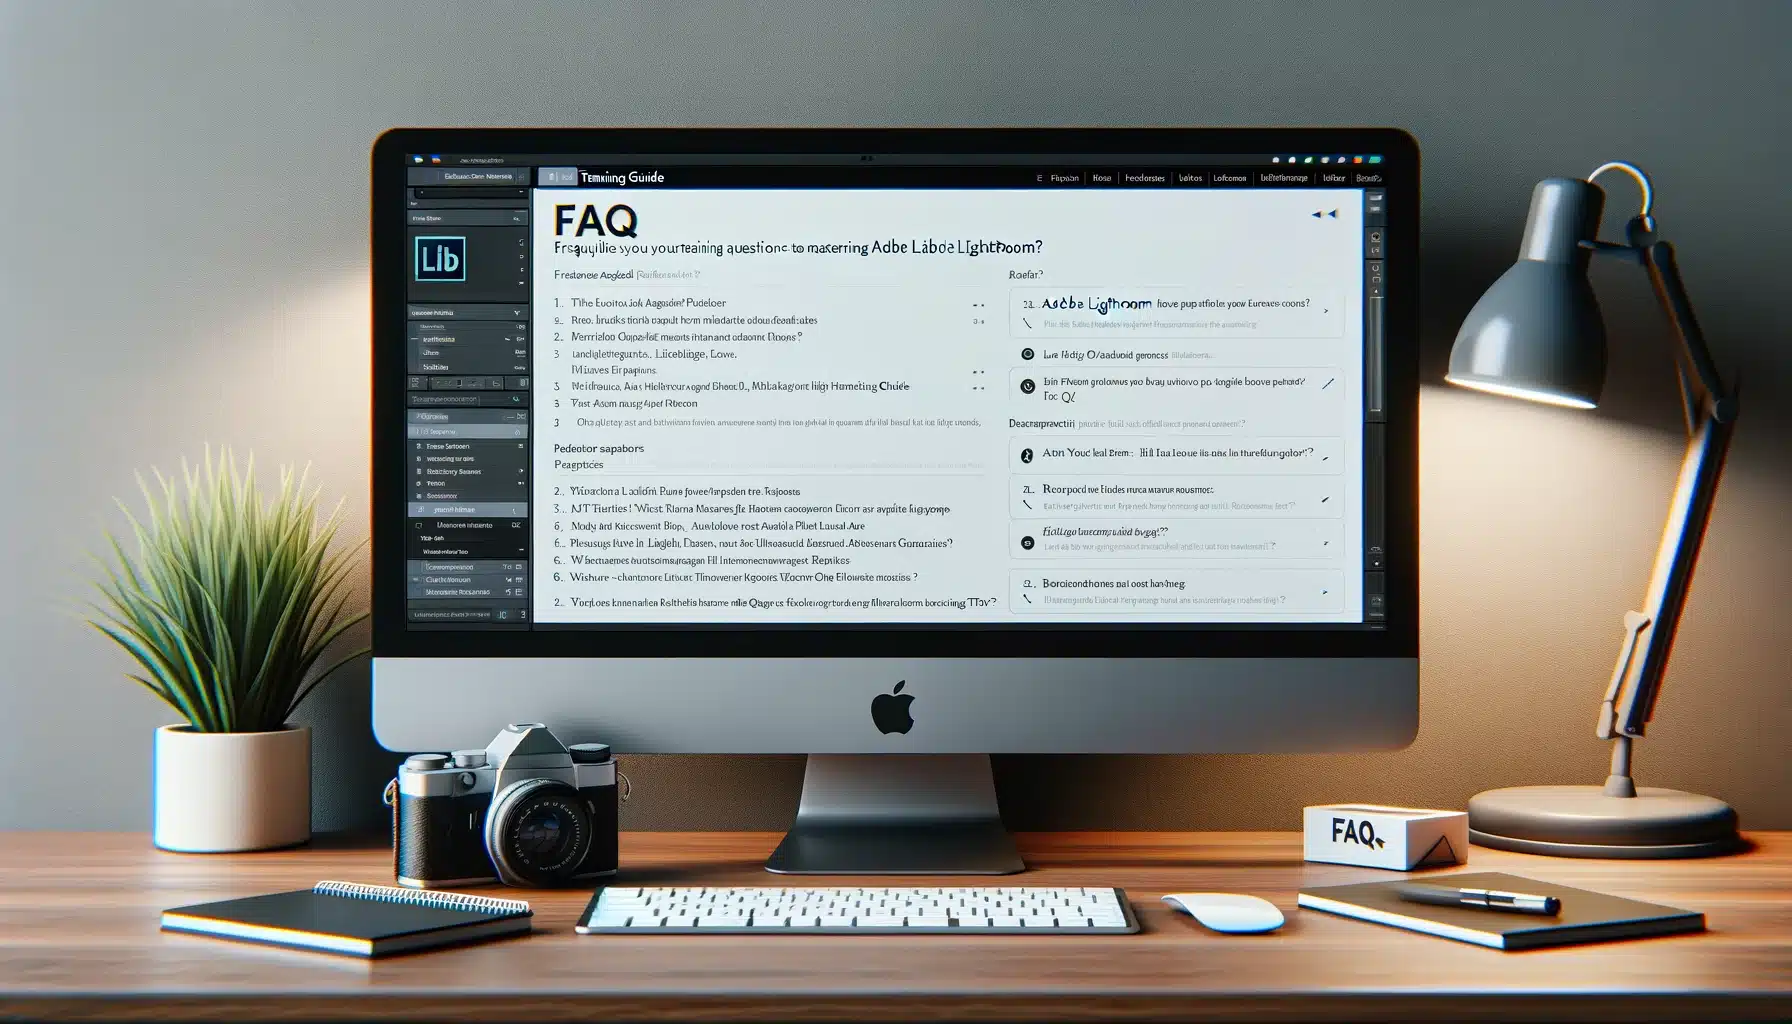 Computer screen showing an FAQ section for the Software Coaching Guide, with questions and answers on mastering Software.